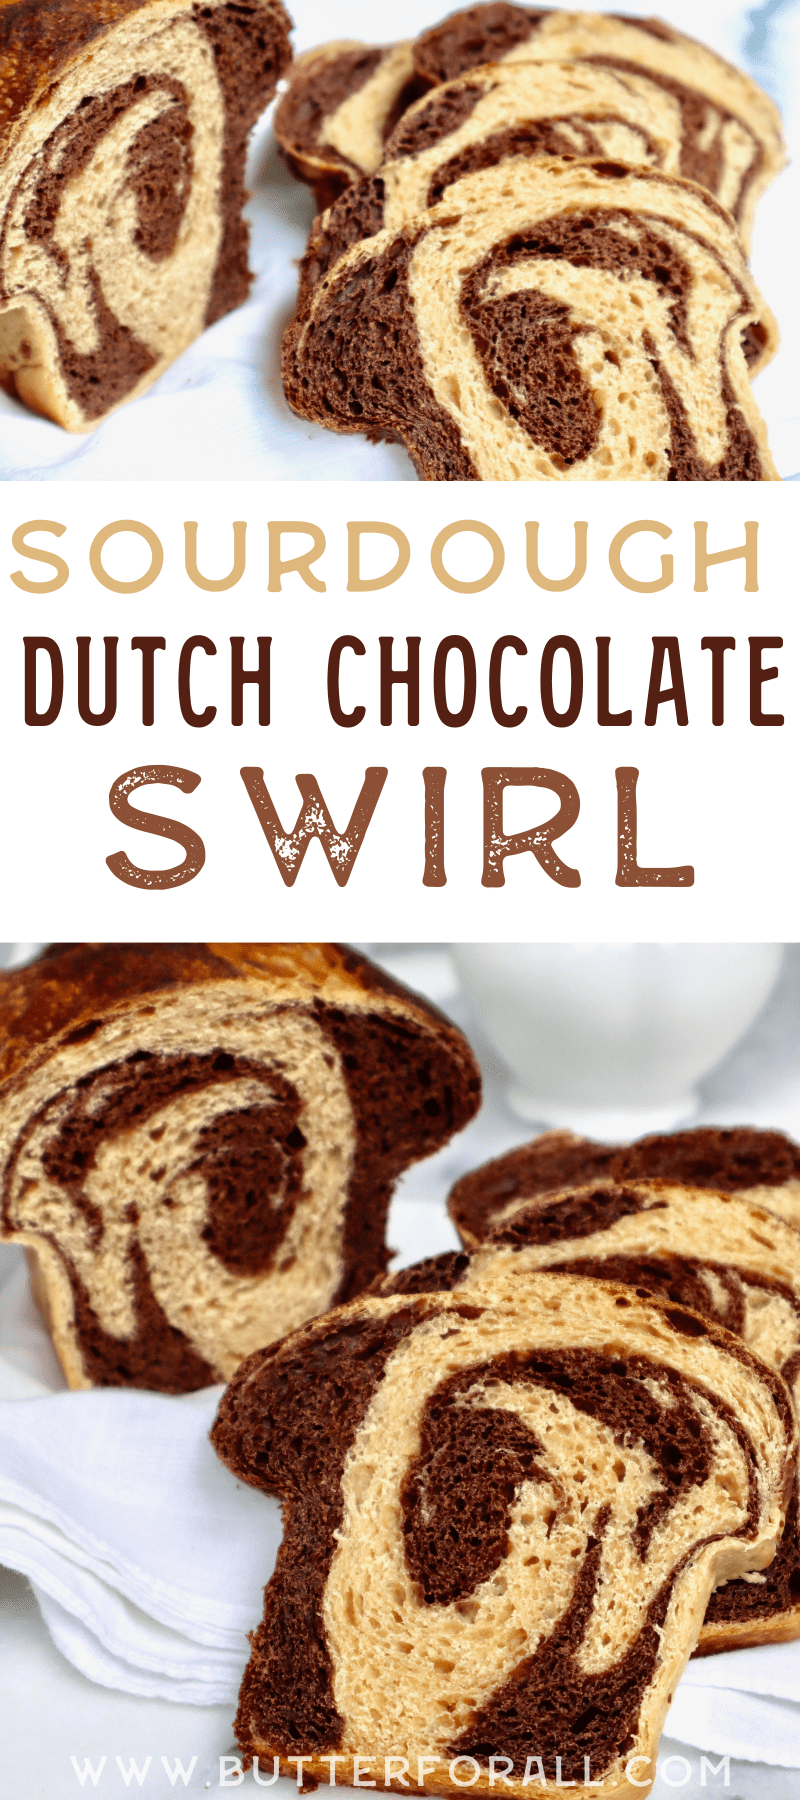 Photo collage with slices of Dutch chocolate swirl bread and text overlay.